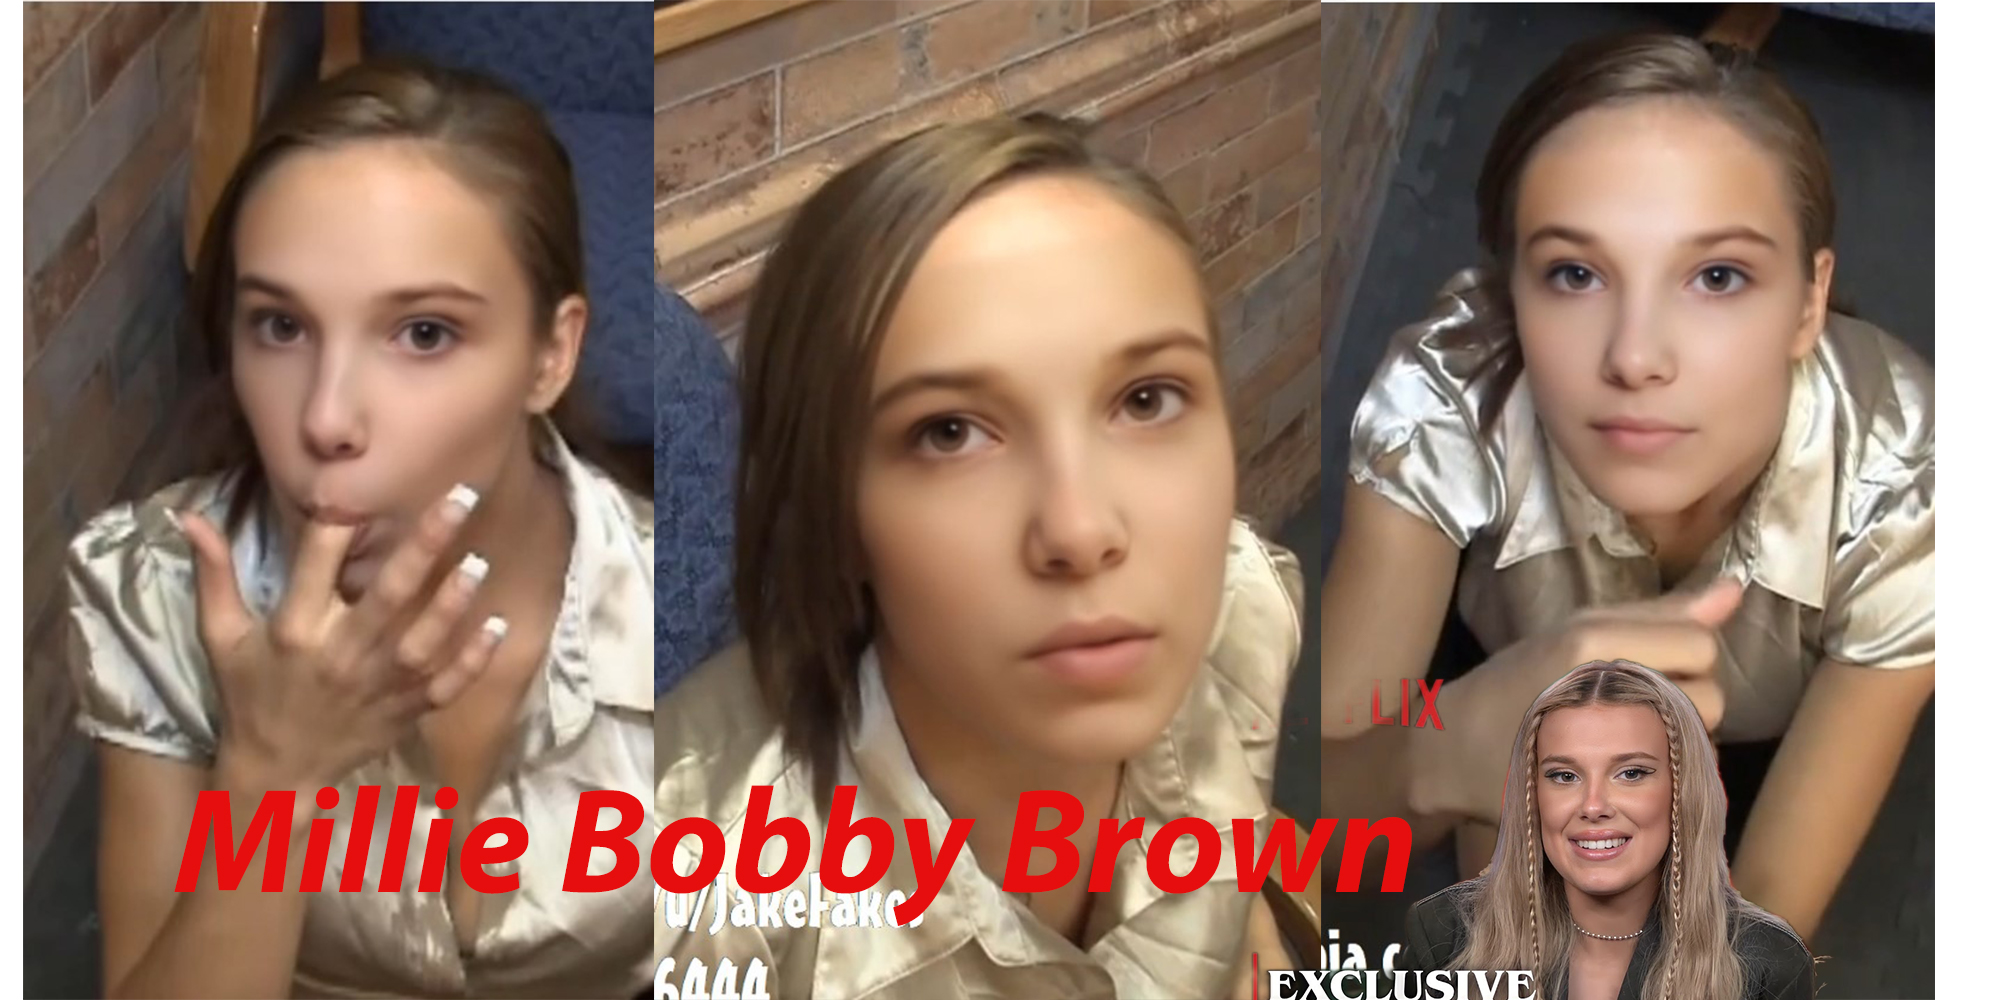 Millie Bobby Brown gives you a hypnotized handjob